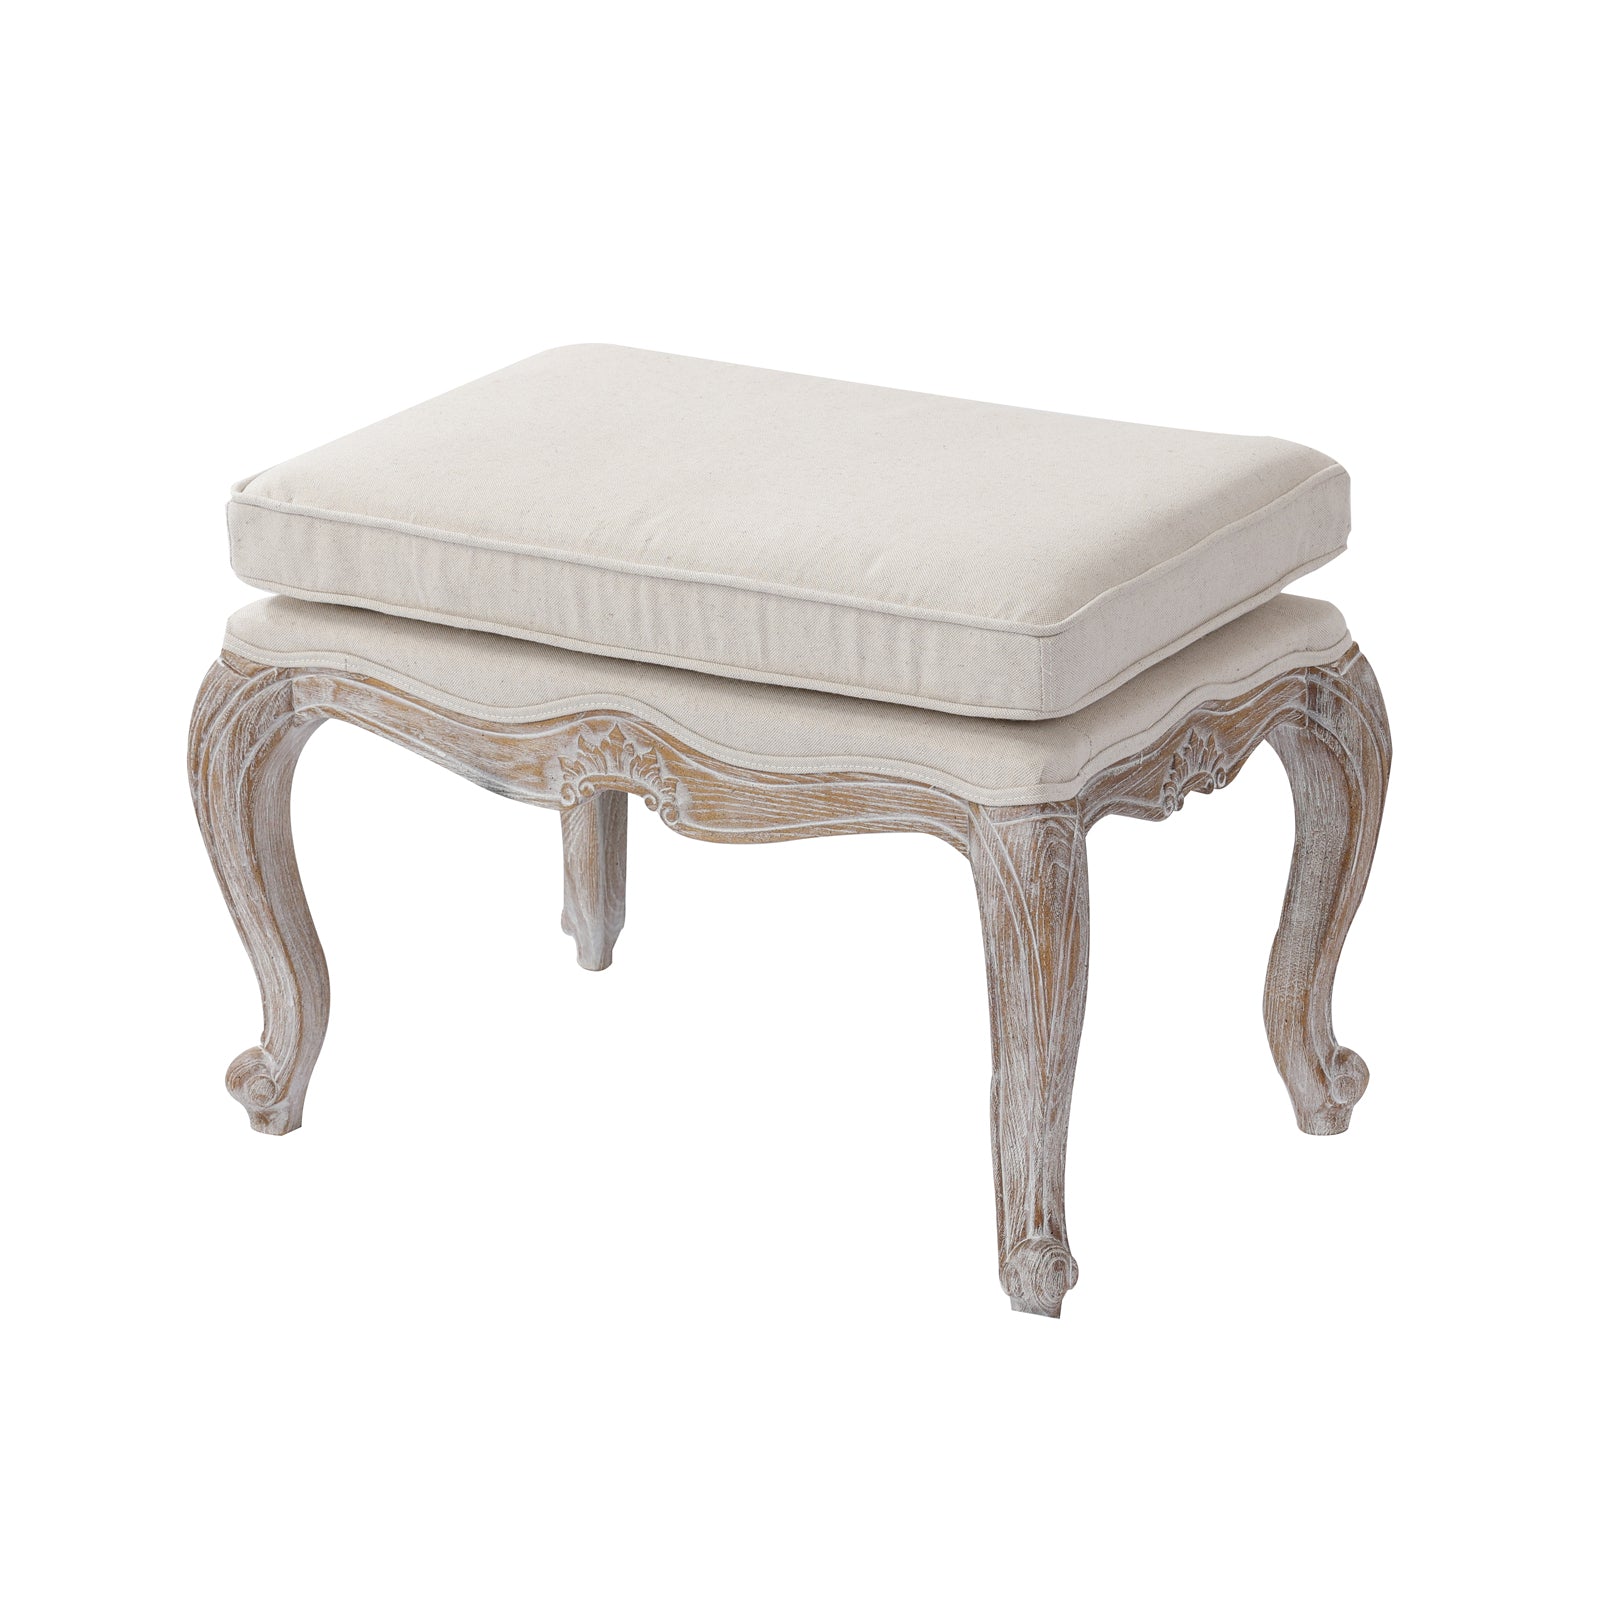 Lori Ottoman White Washed Wooden & Beige Color Fabric